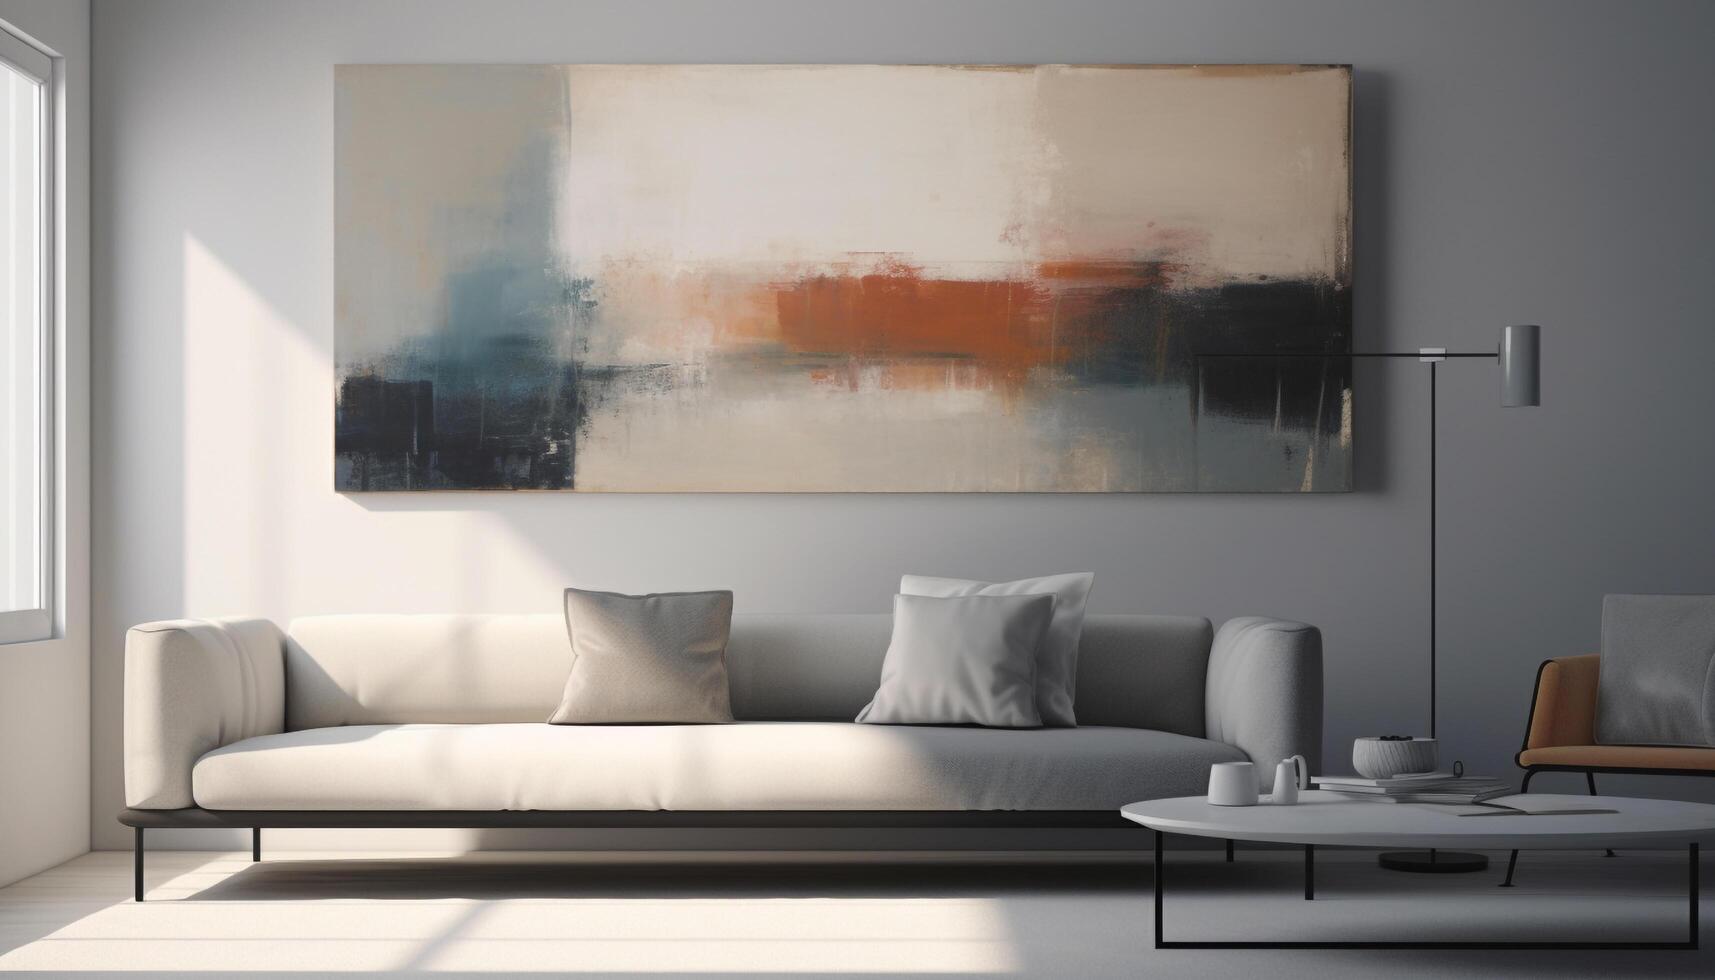 A modern living room with comfortable sofa, elegant chair, and paintings generated by AI photo